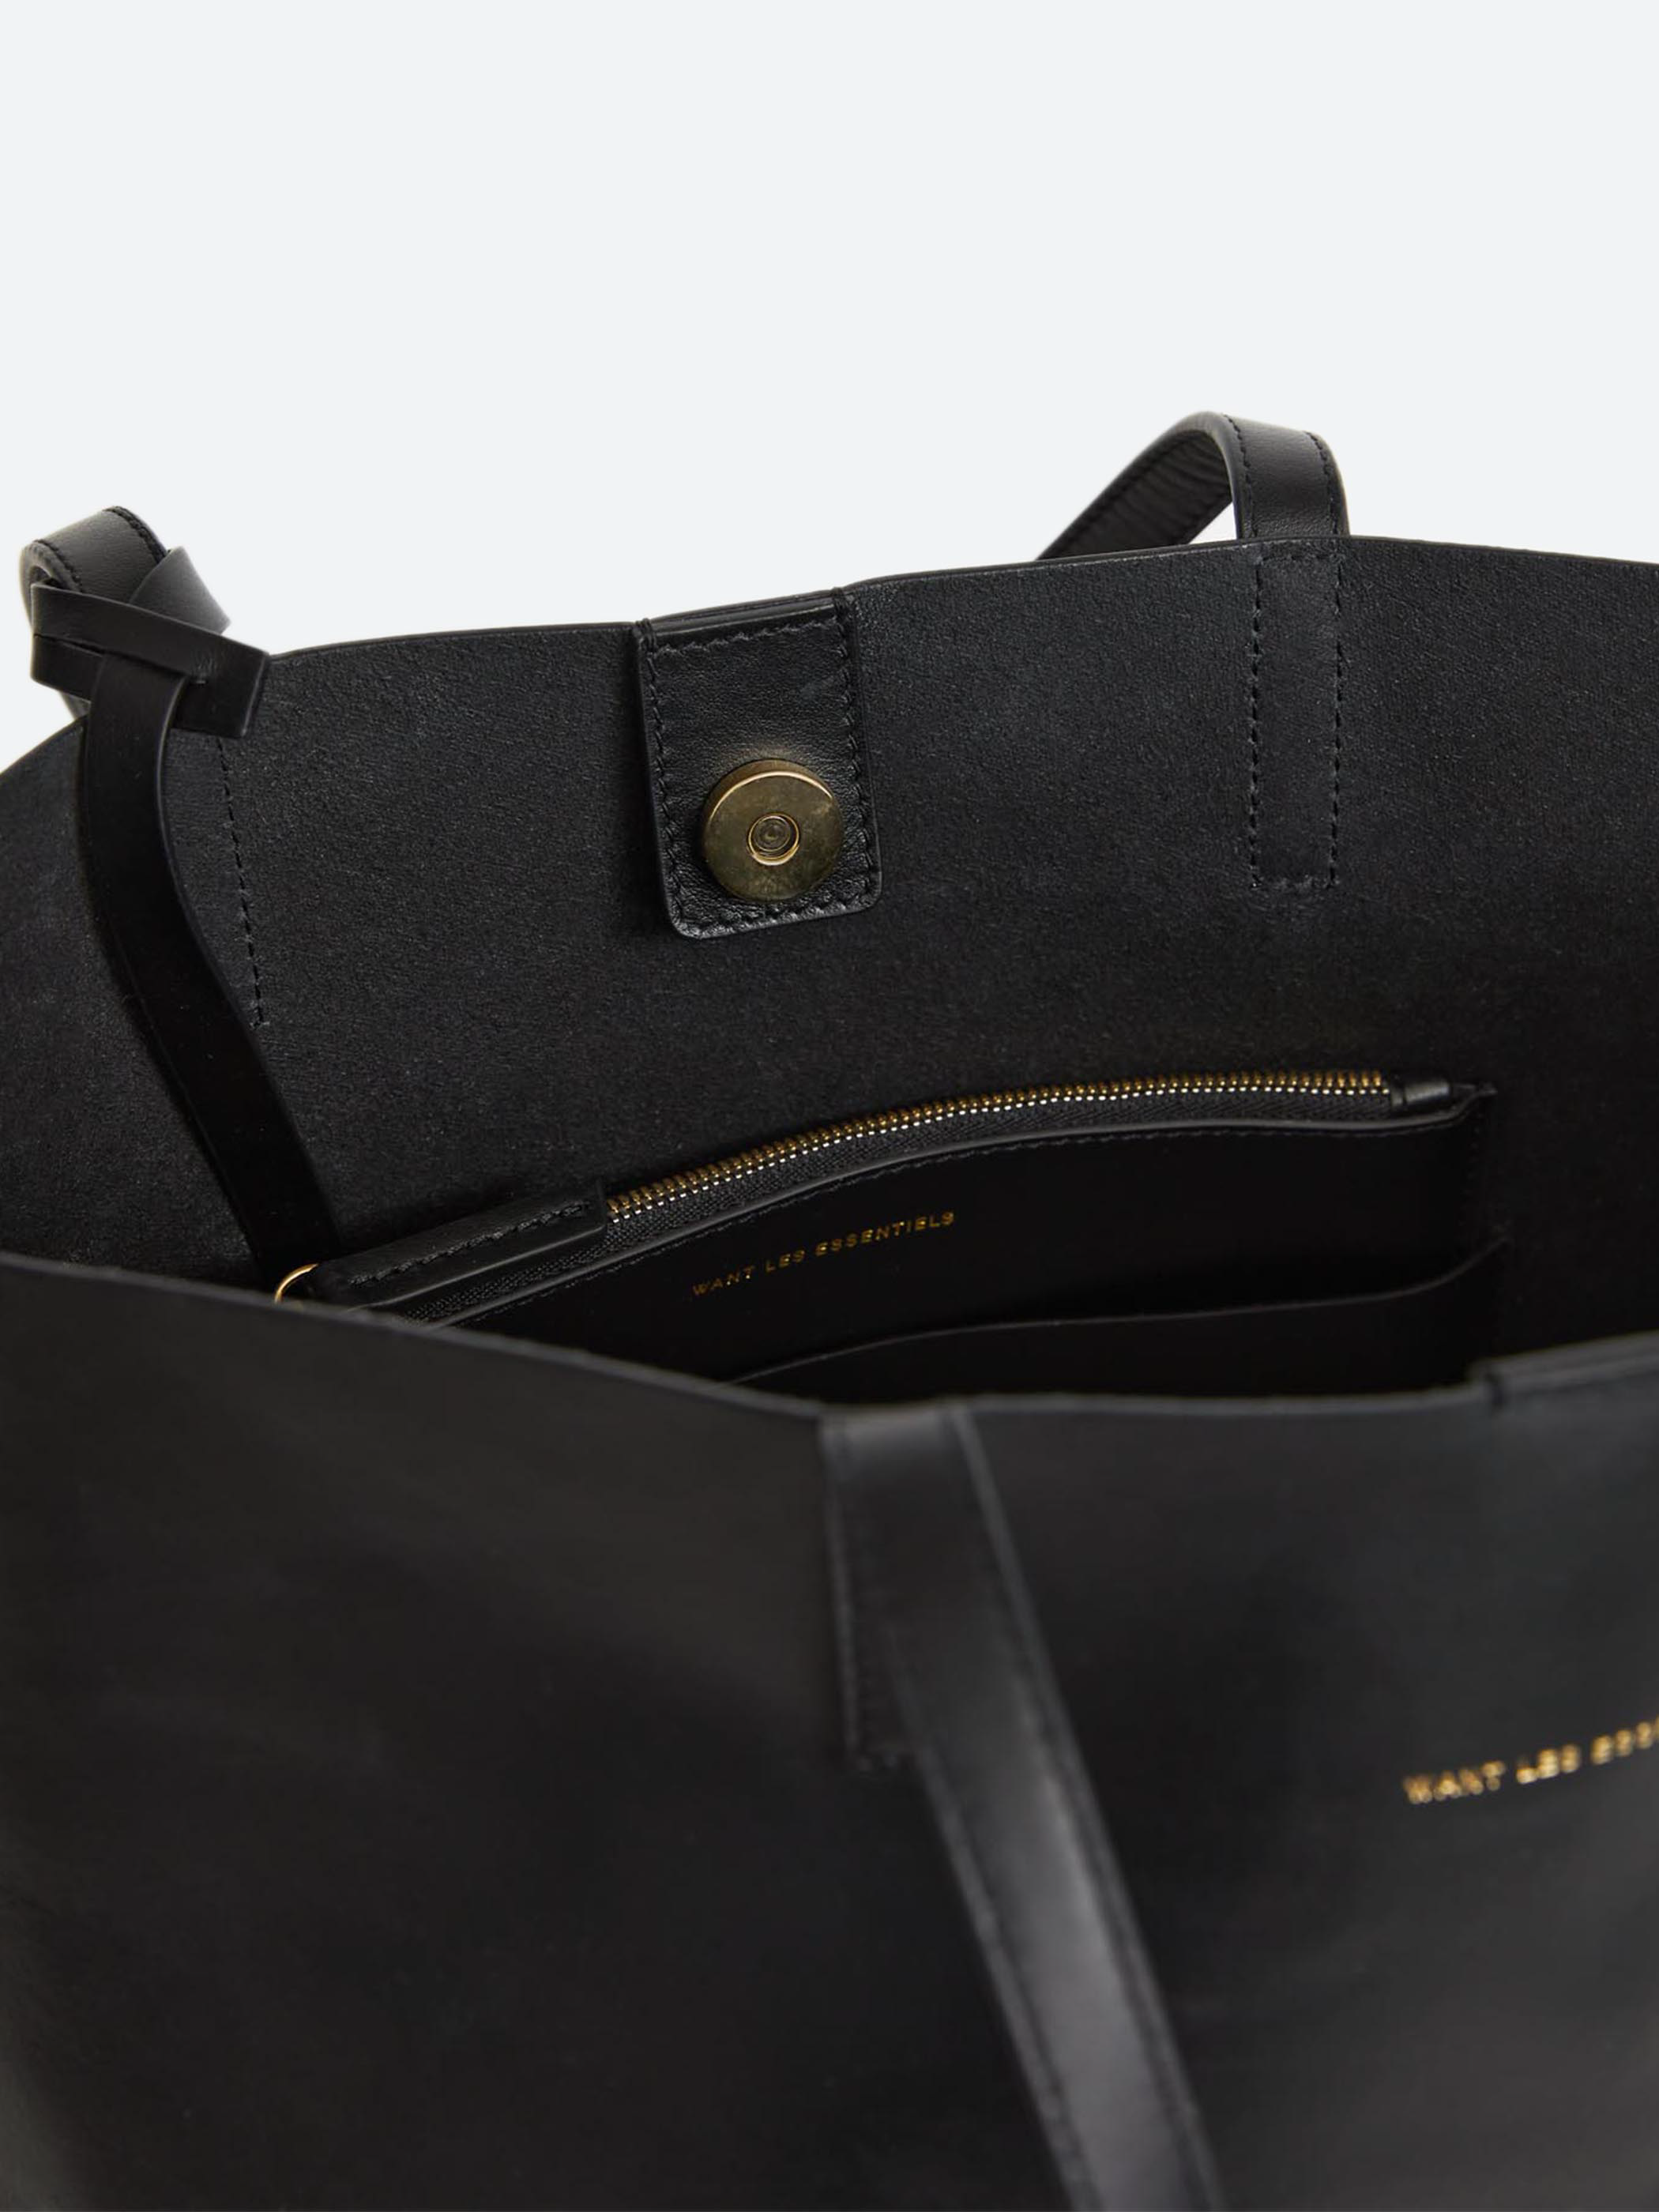 Logan Leather Vertical Tote